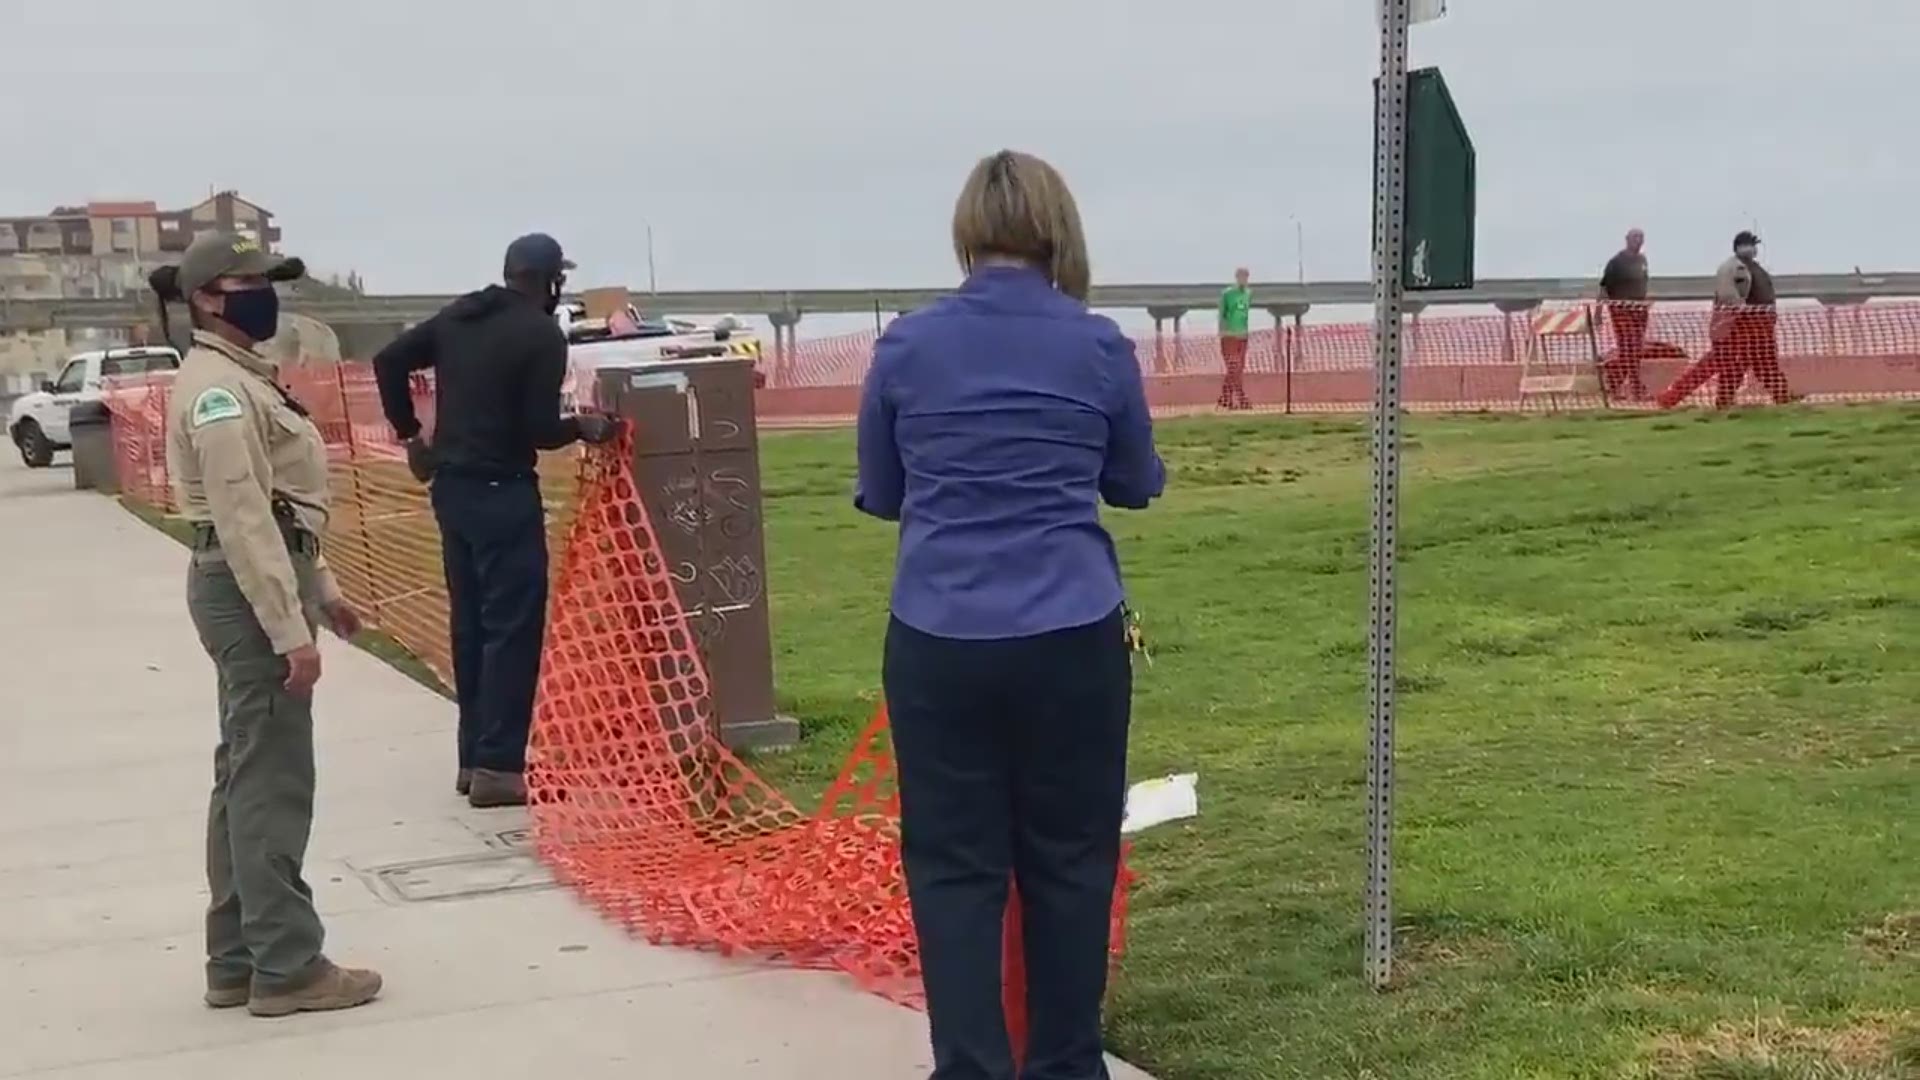 San Diego Parks and Recreation put up plastic netting around Veteran's Park in Ocean Beach to prevent large crowds from gathering despite COVID-19 concerns.